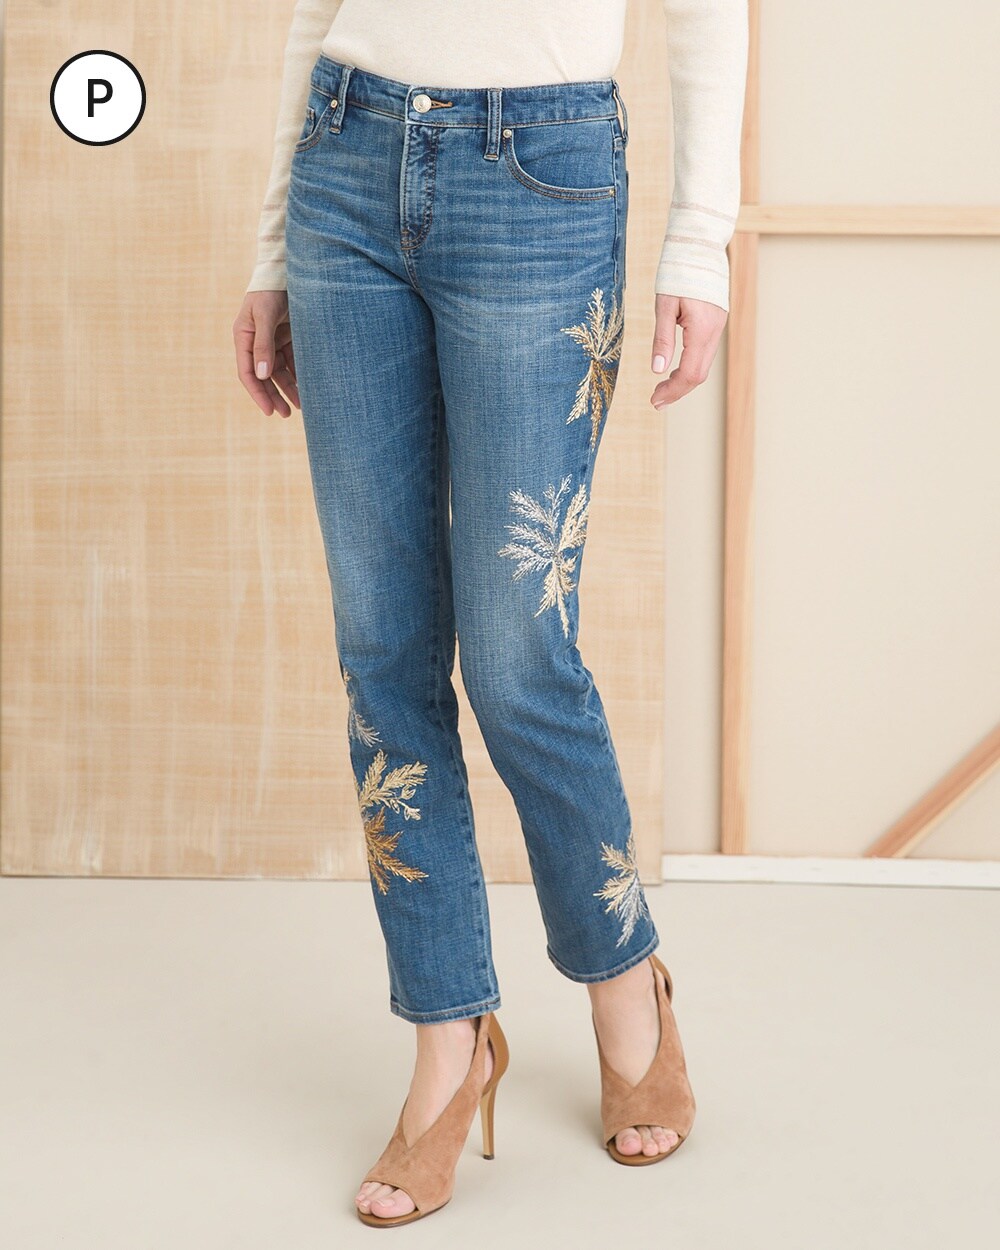 So Slimming Petite Embroidered Jeans